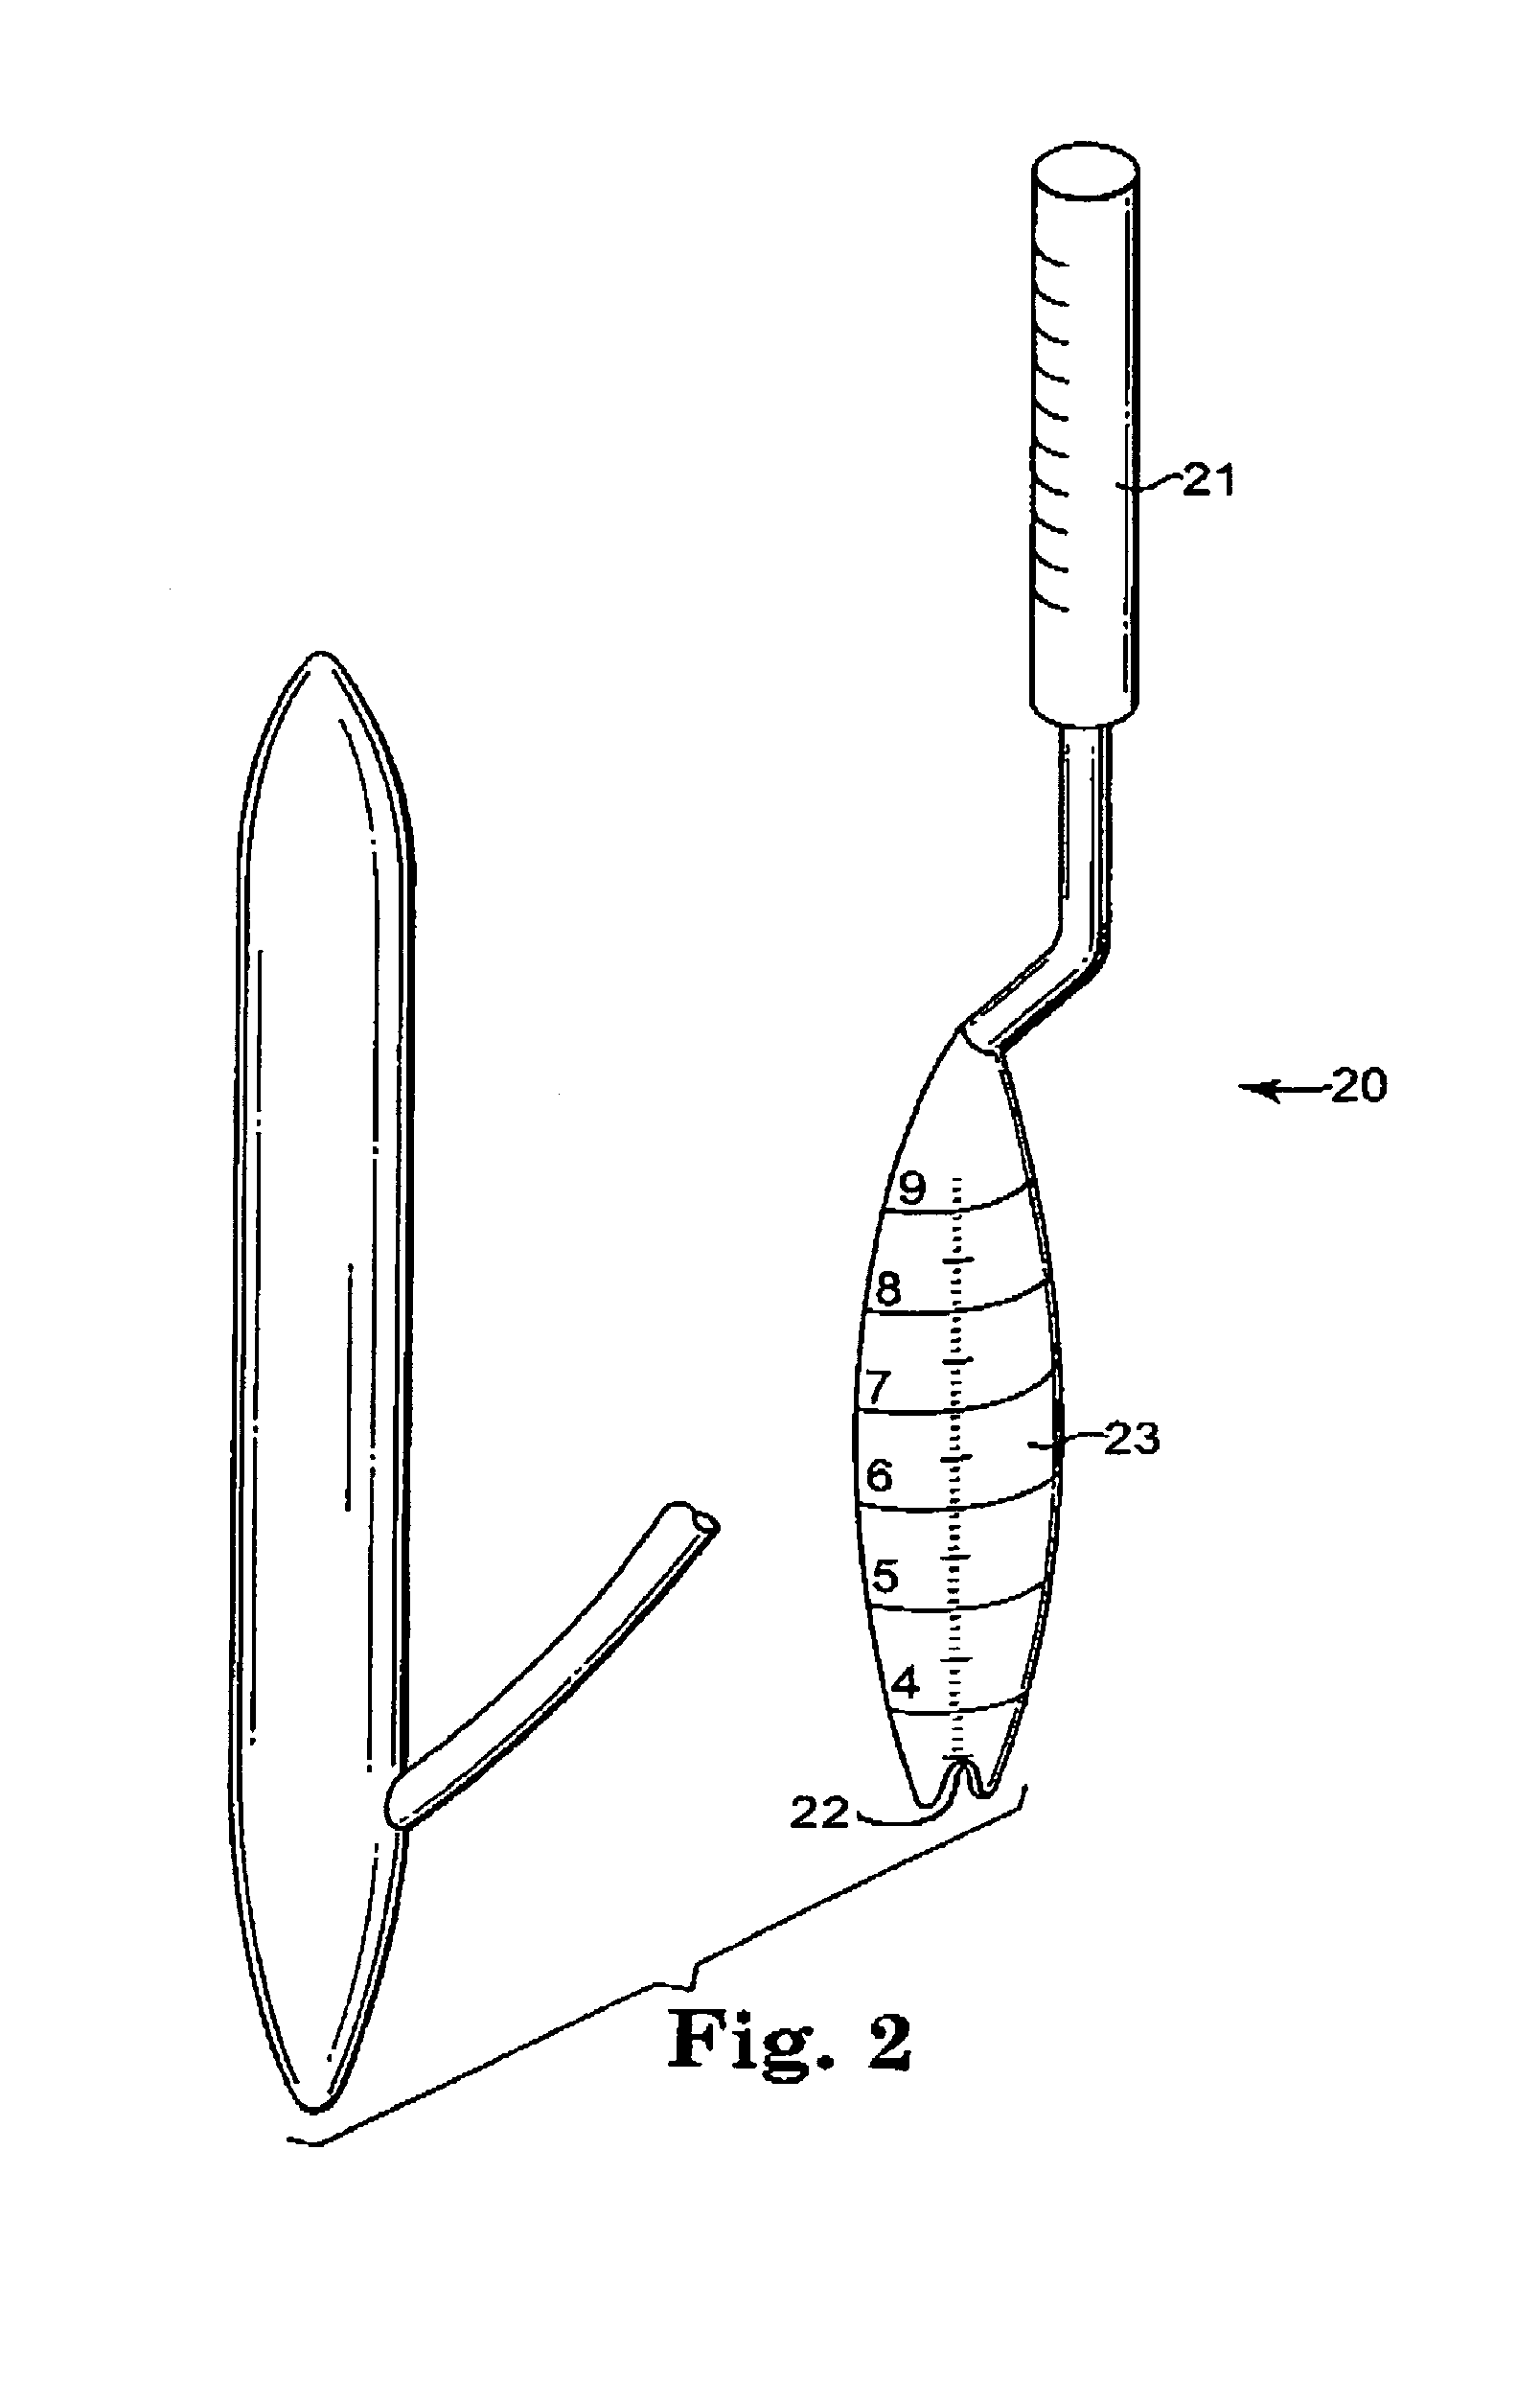 Penile prosthesis and surgical instruments for implantation of penile prostheses